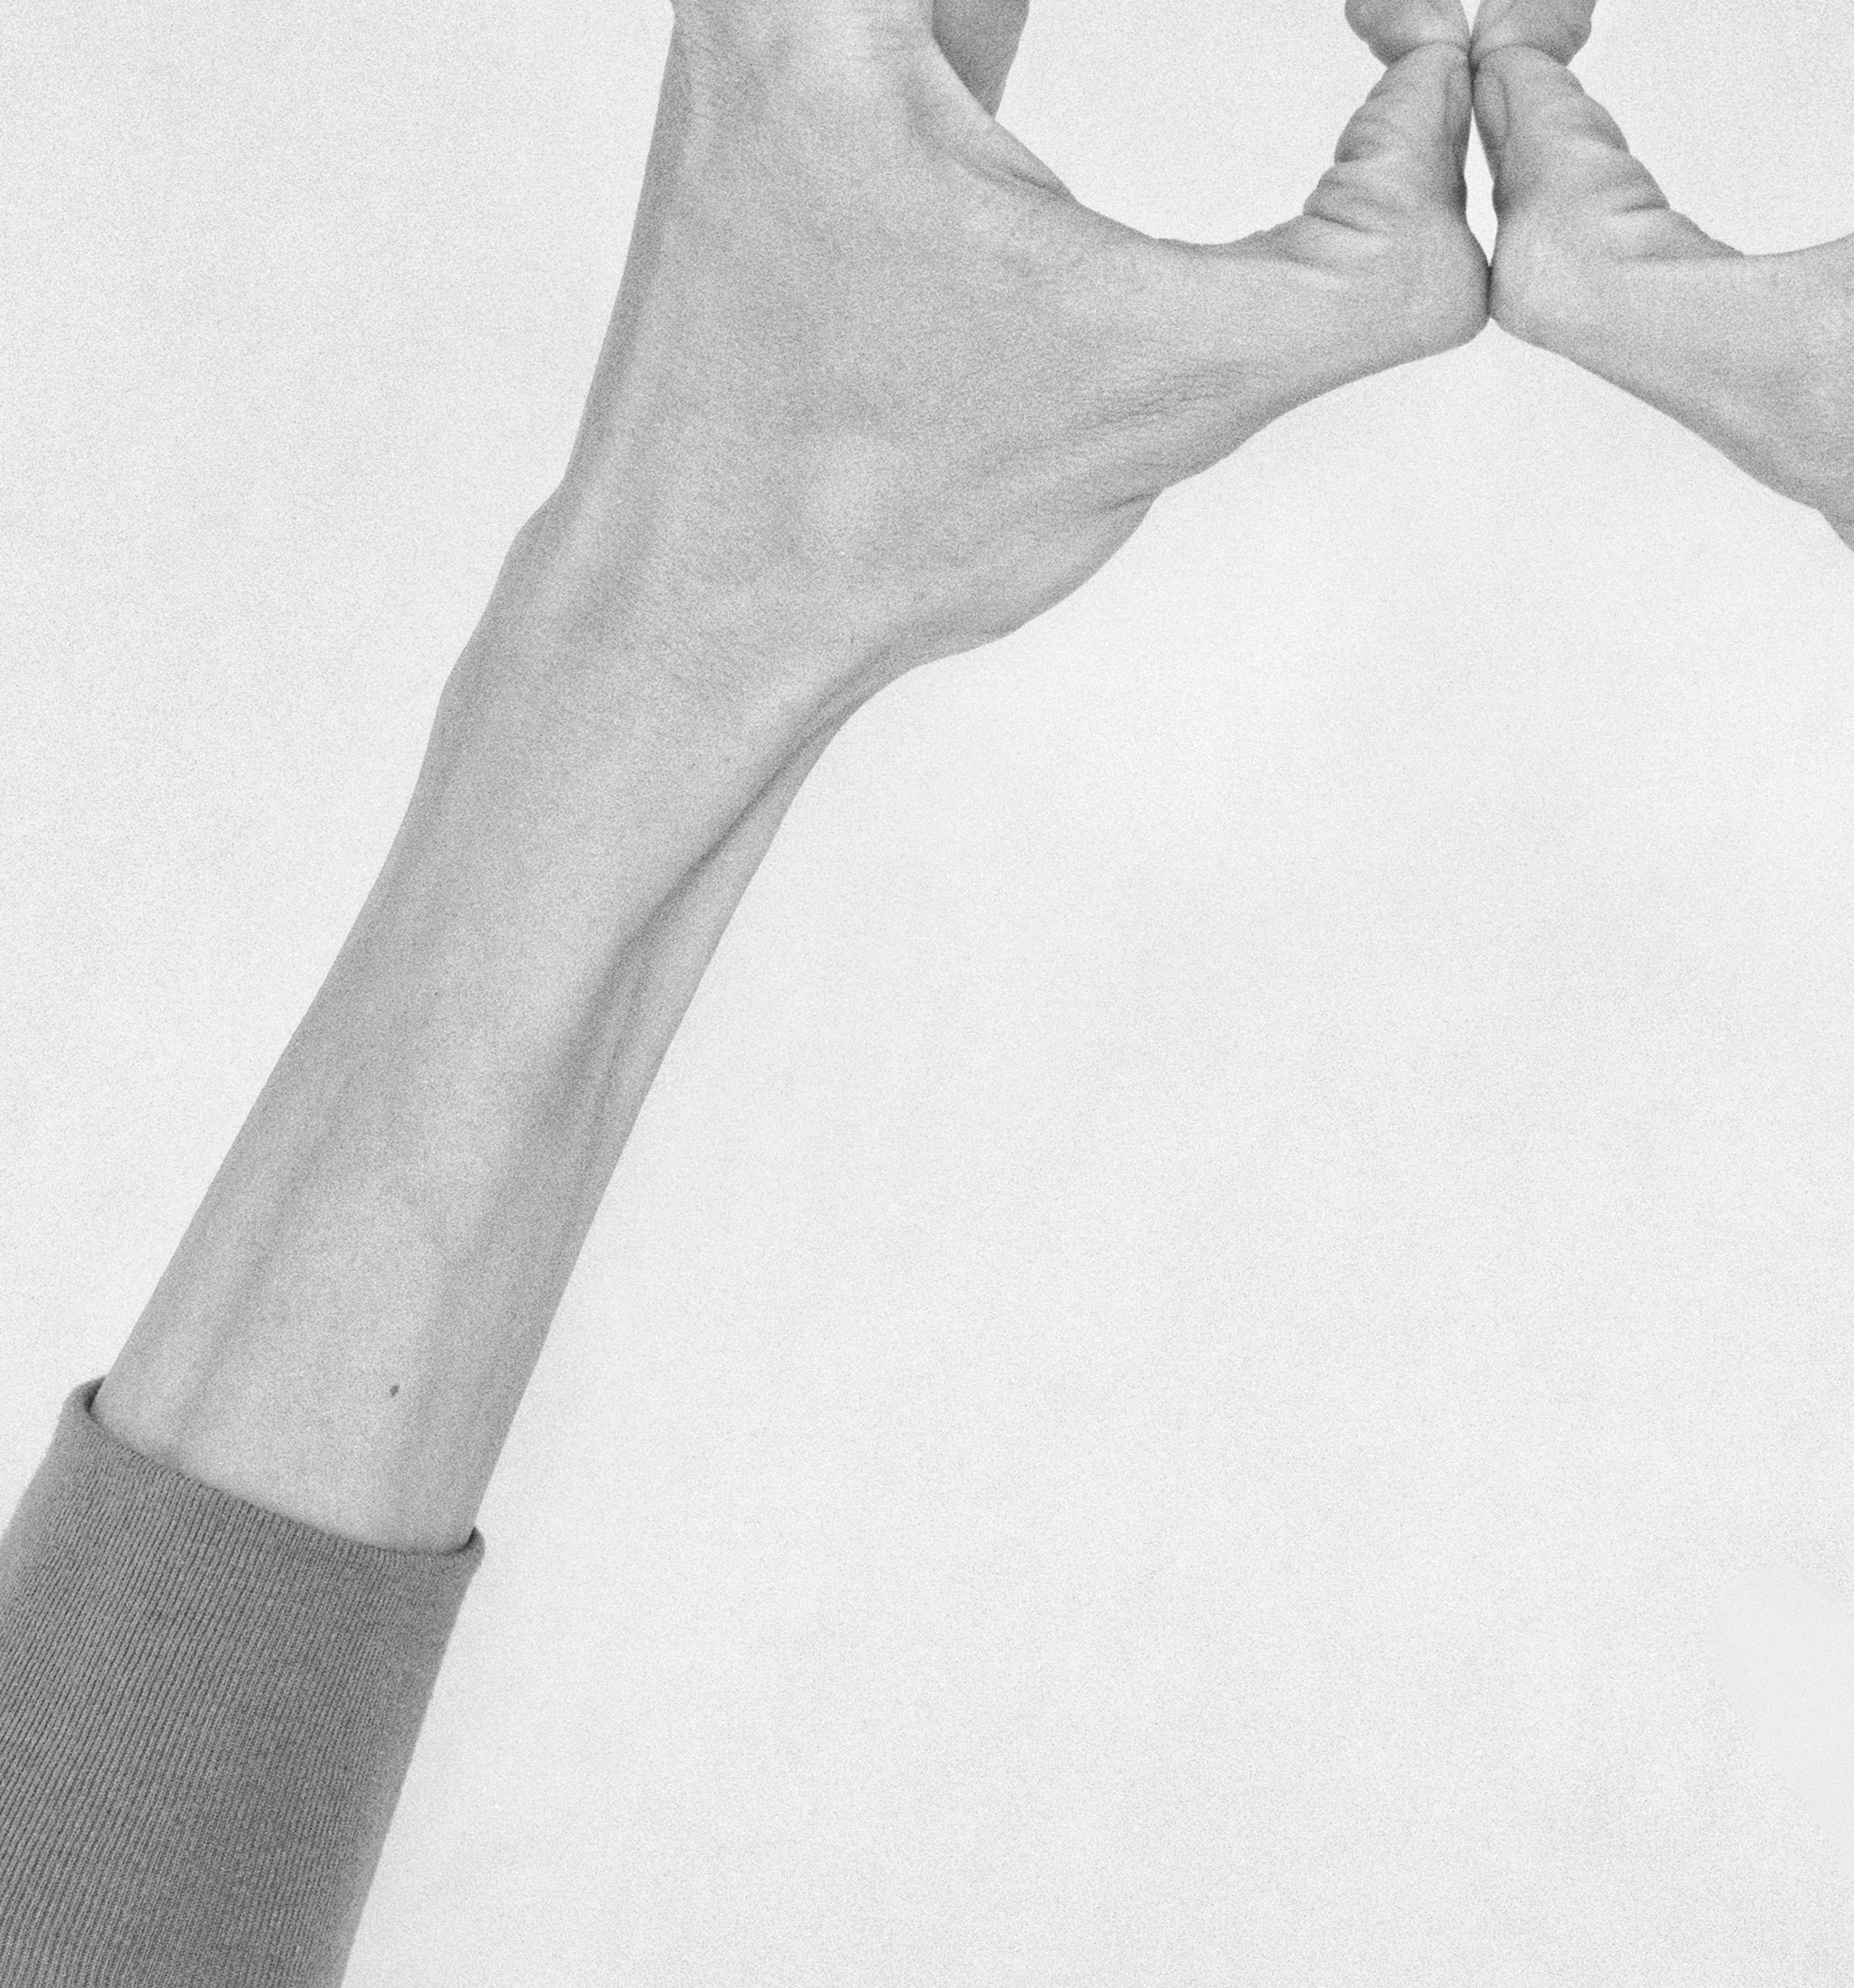 Untitled XX. From the Series Chiromorphose. Hands. Black & White Photography For Sale 2